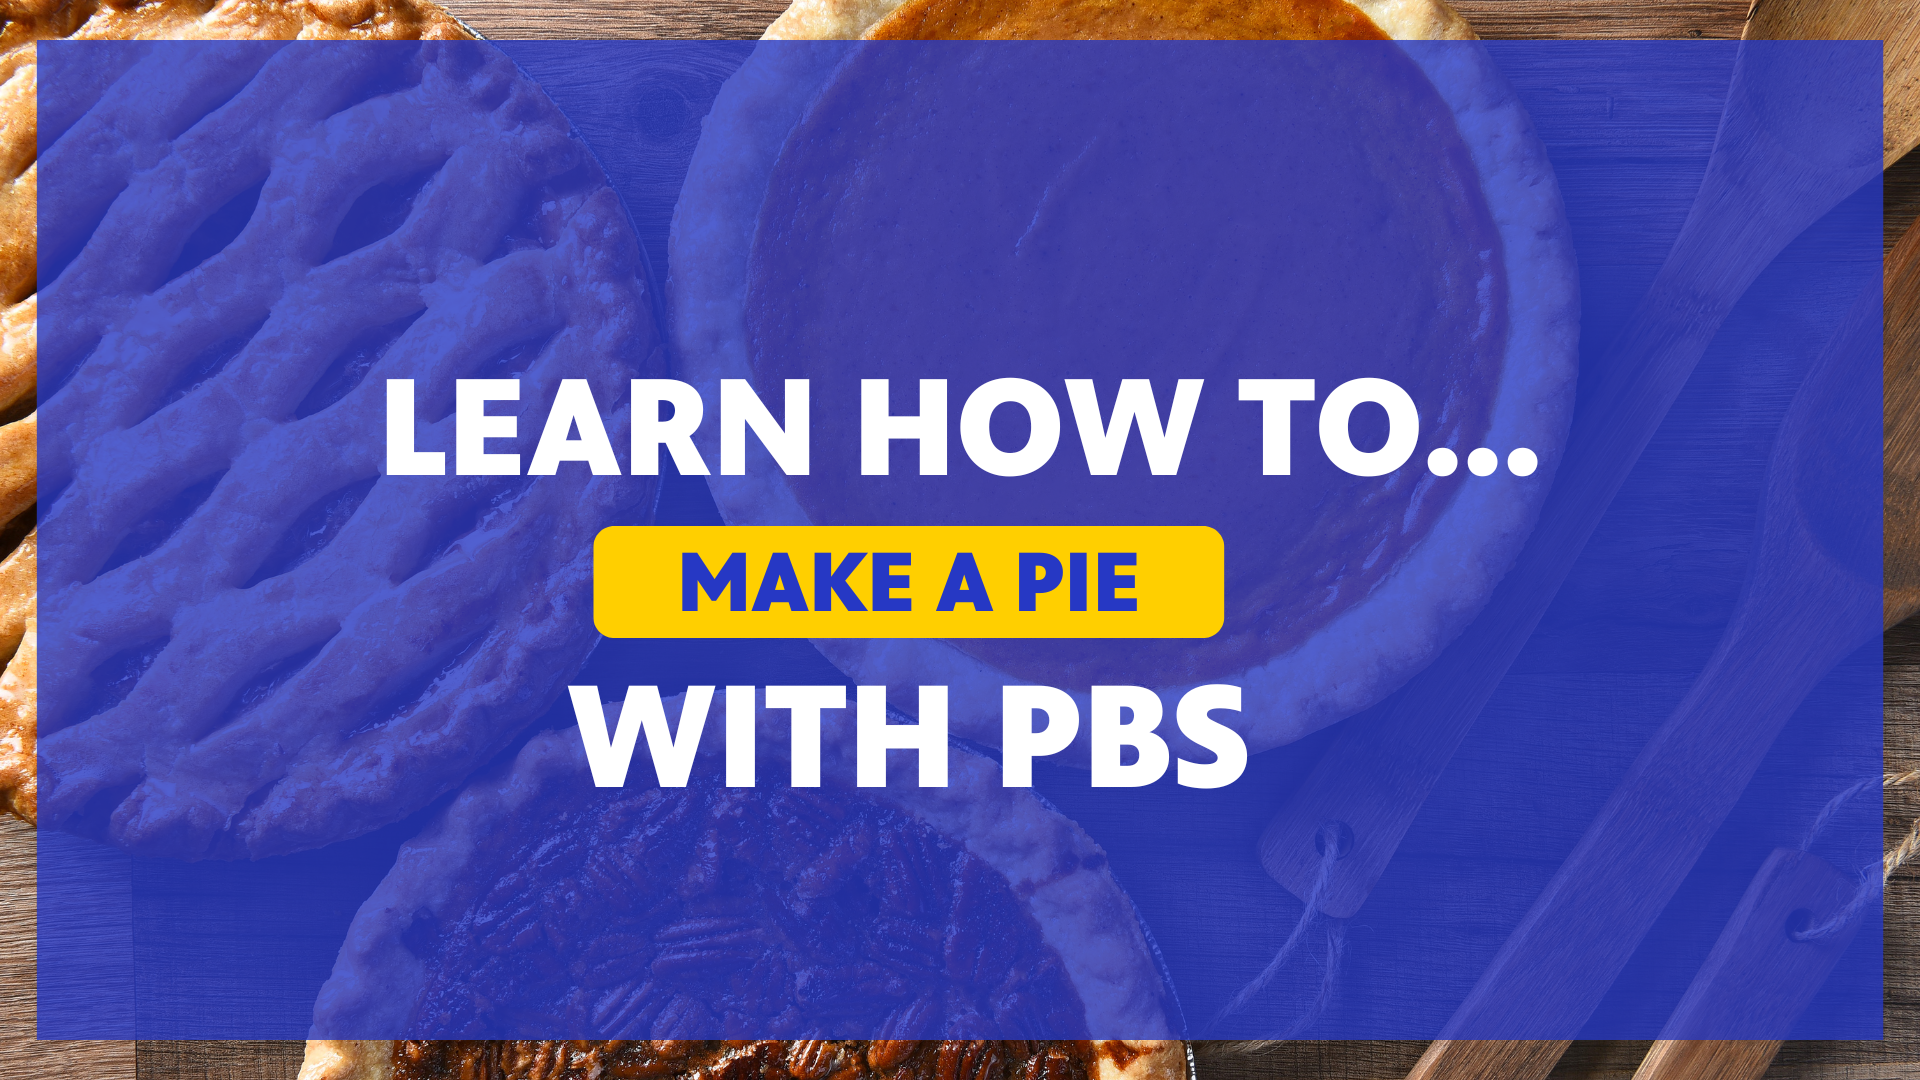 Learn How to Make a Pie with PBS